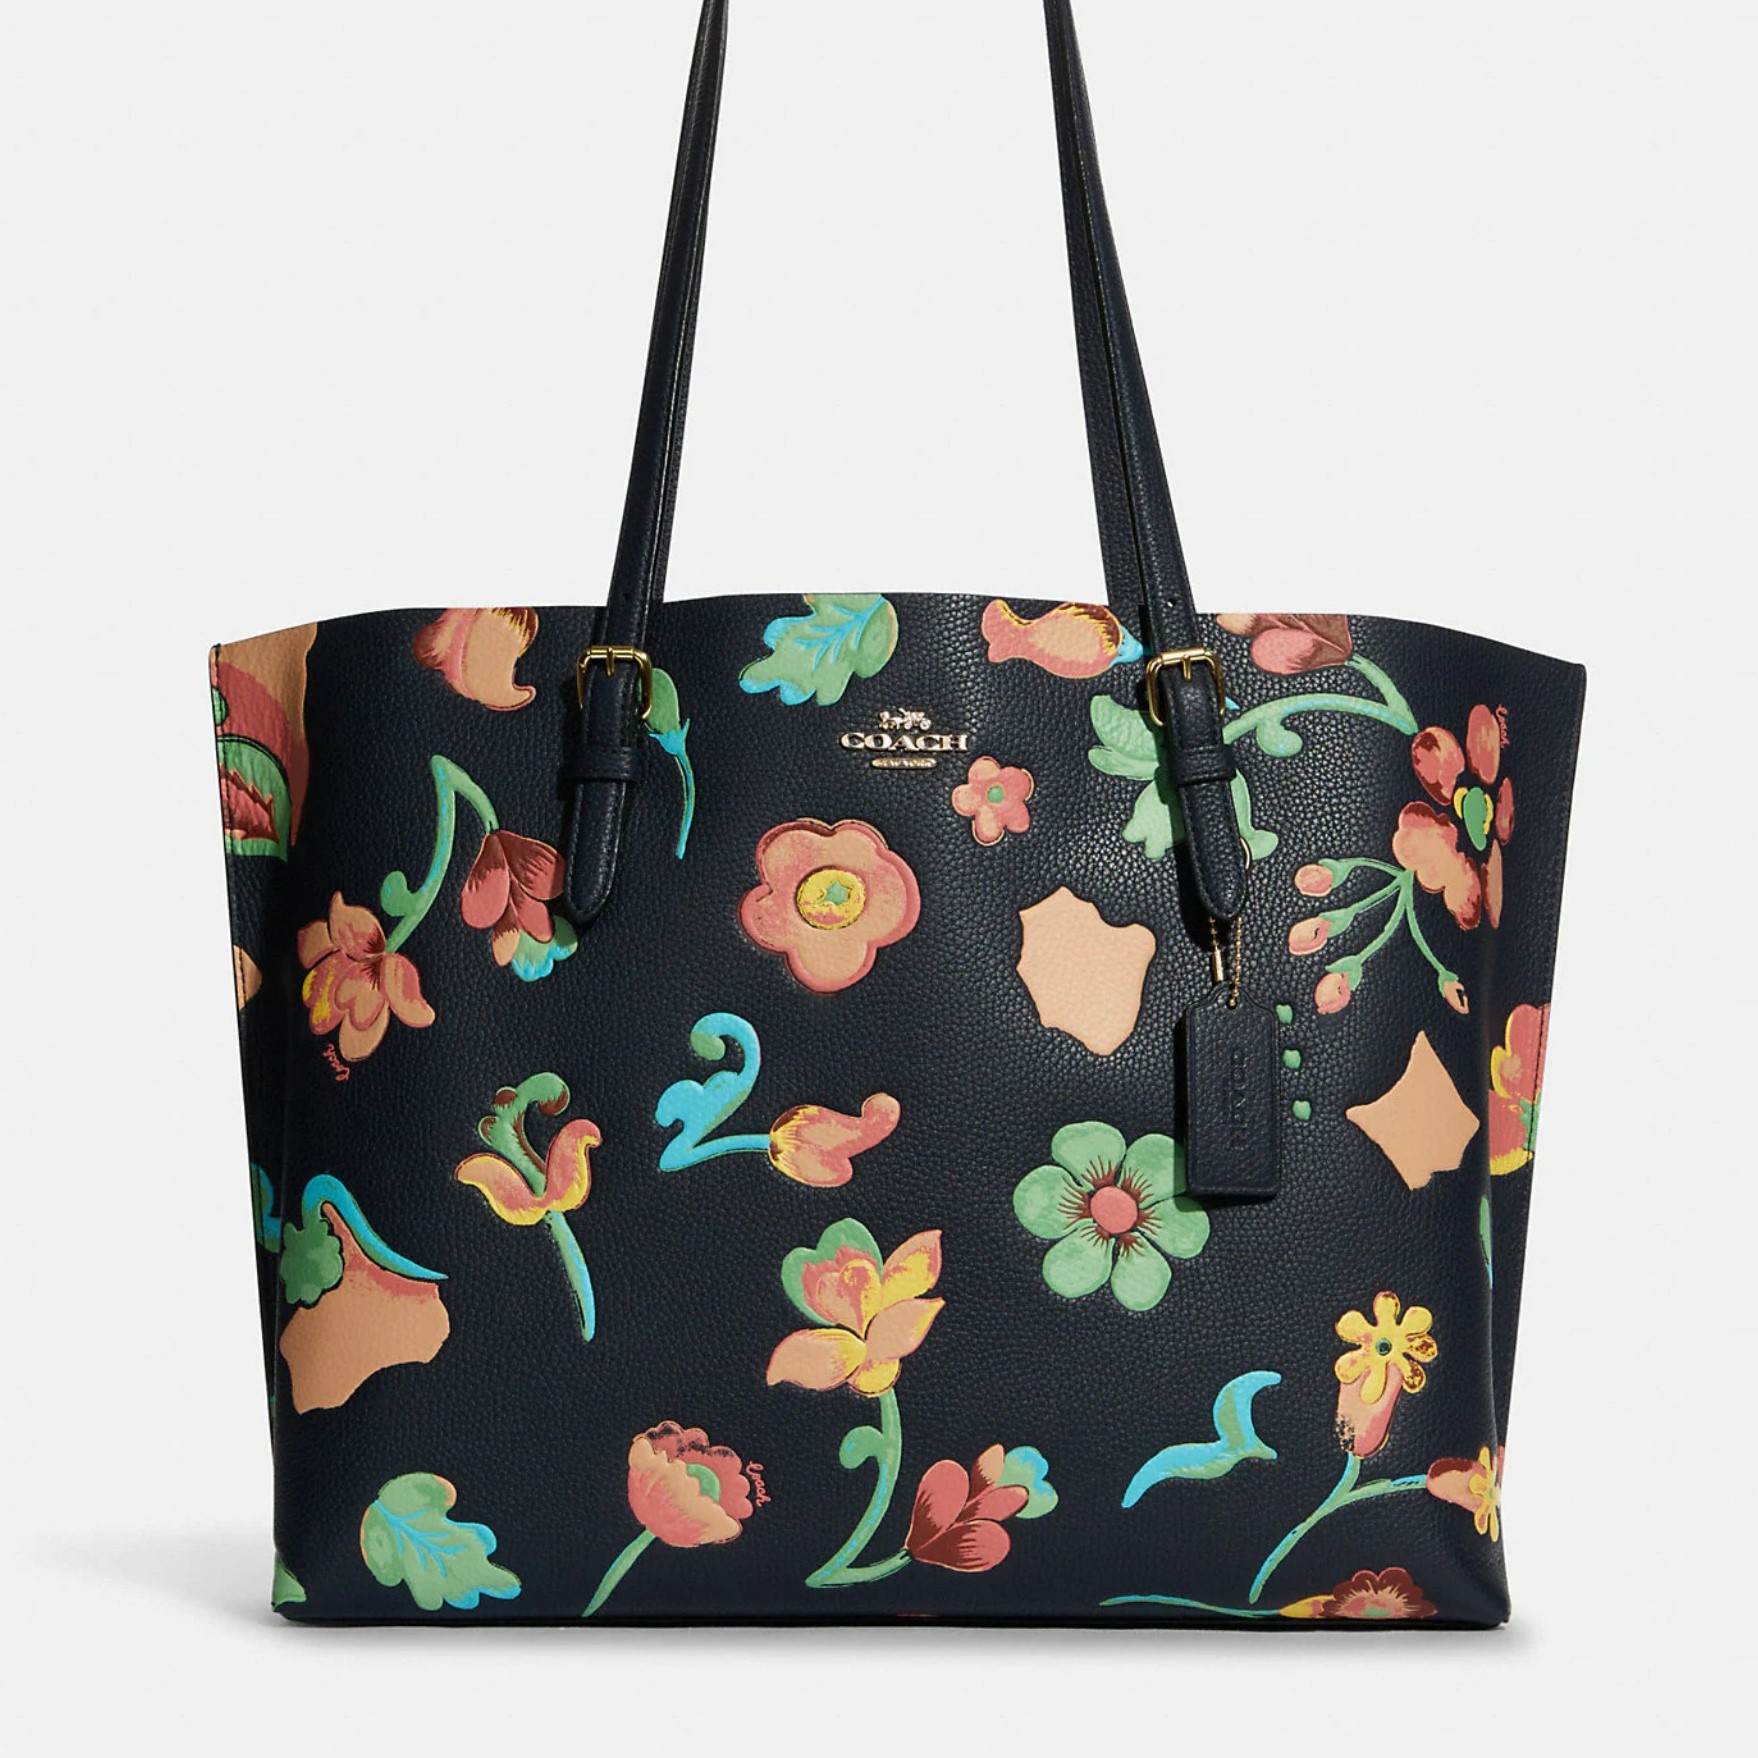 TÚI COACH MOLLIE TOTE WITH DREAMY LAND FLORAL PRINT 3